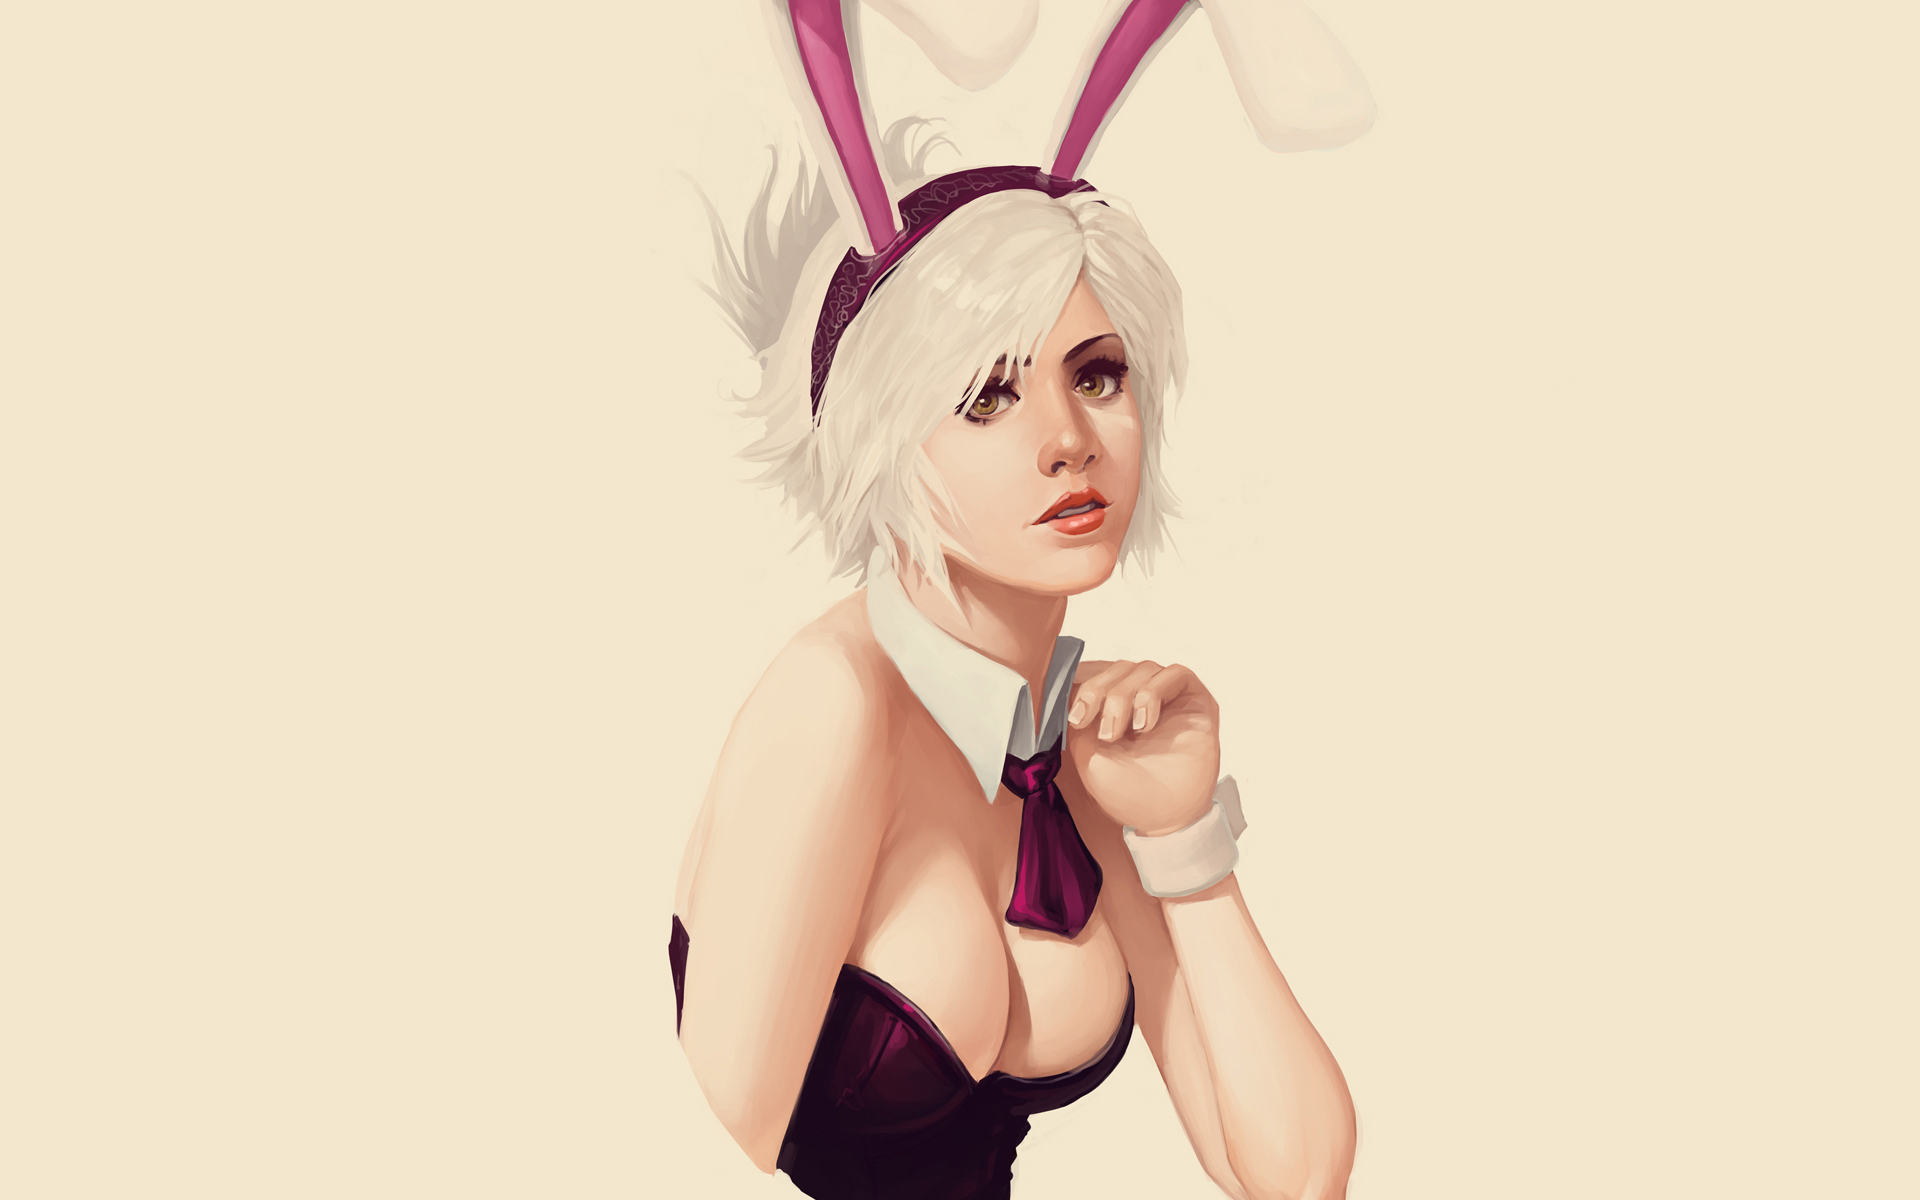 General 1920x1200 artwork women bunny ears white hair boobs cleavage tie corset looking at viewer simple background beige background red lipstick Jonathan Hamilton